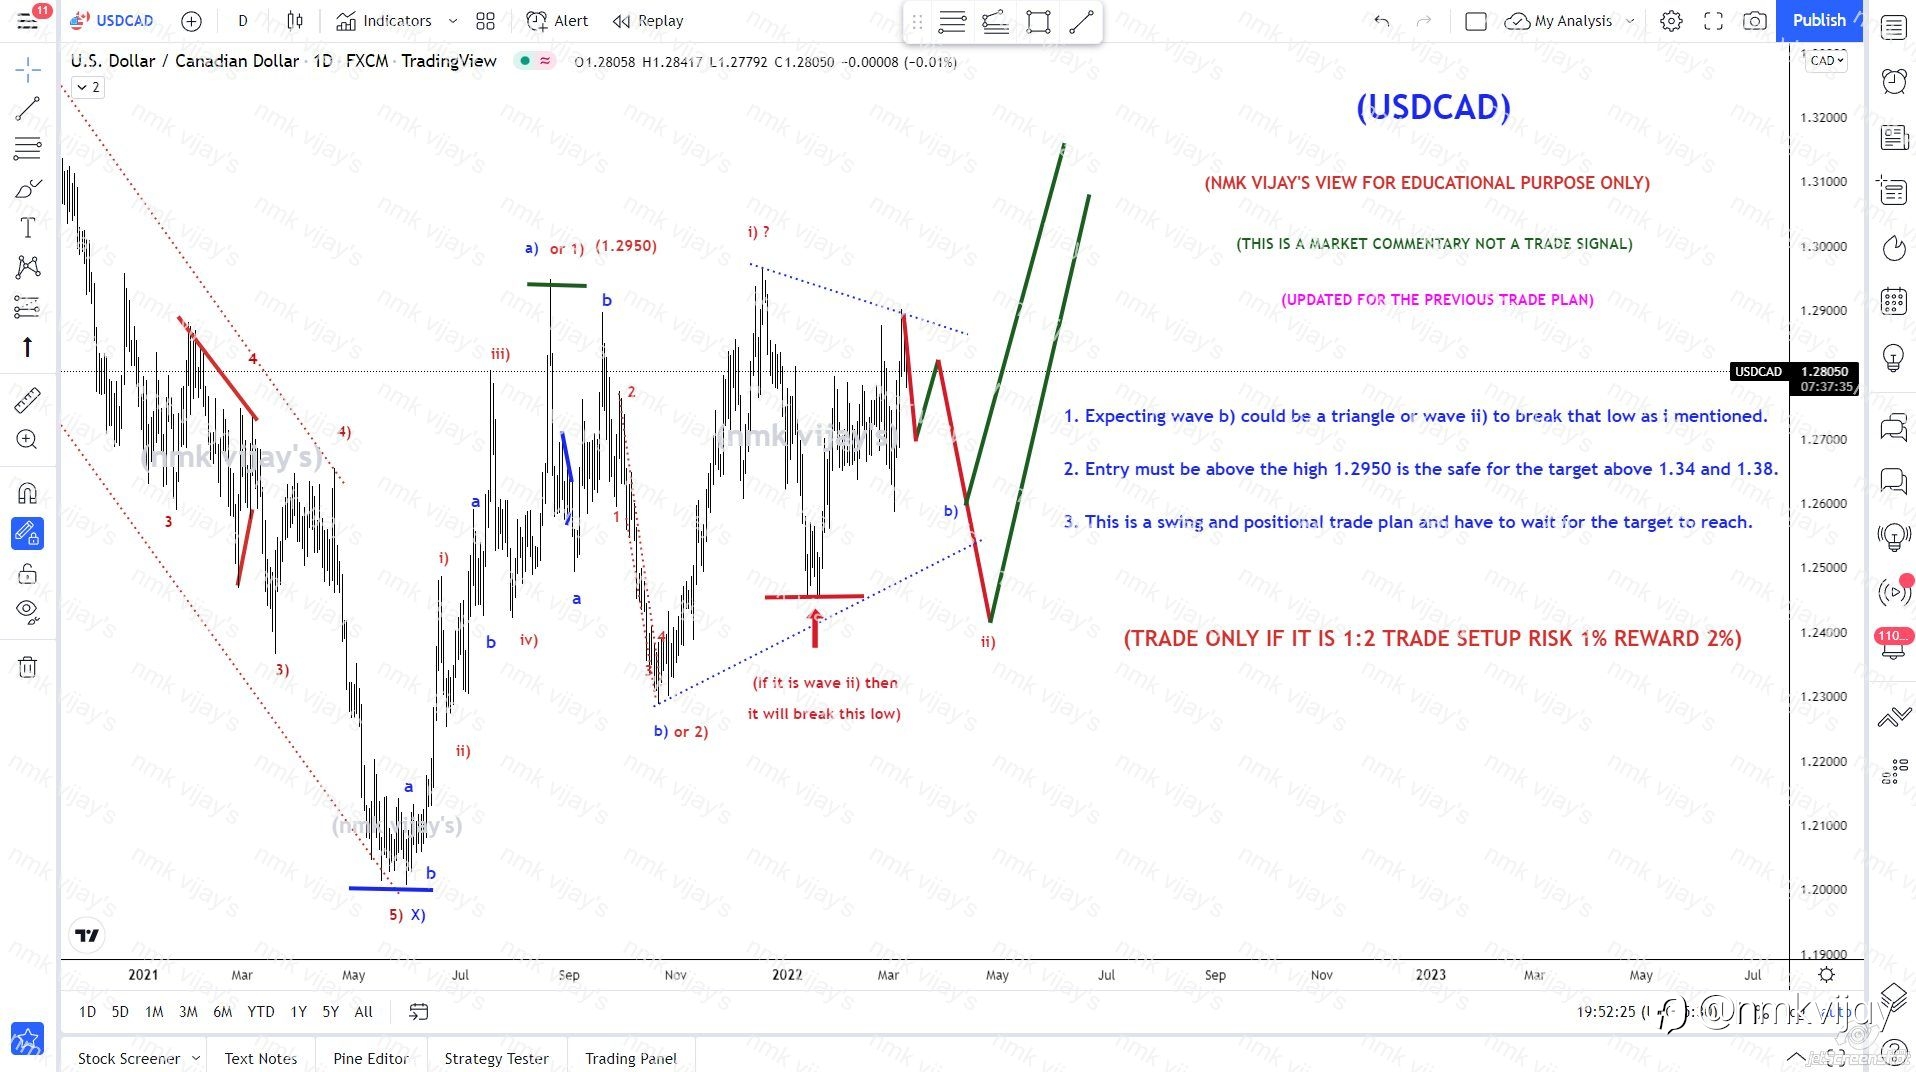 USDCAD-Expecting wave ii) or a Triangle in wave b).